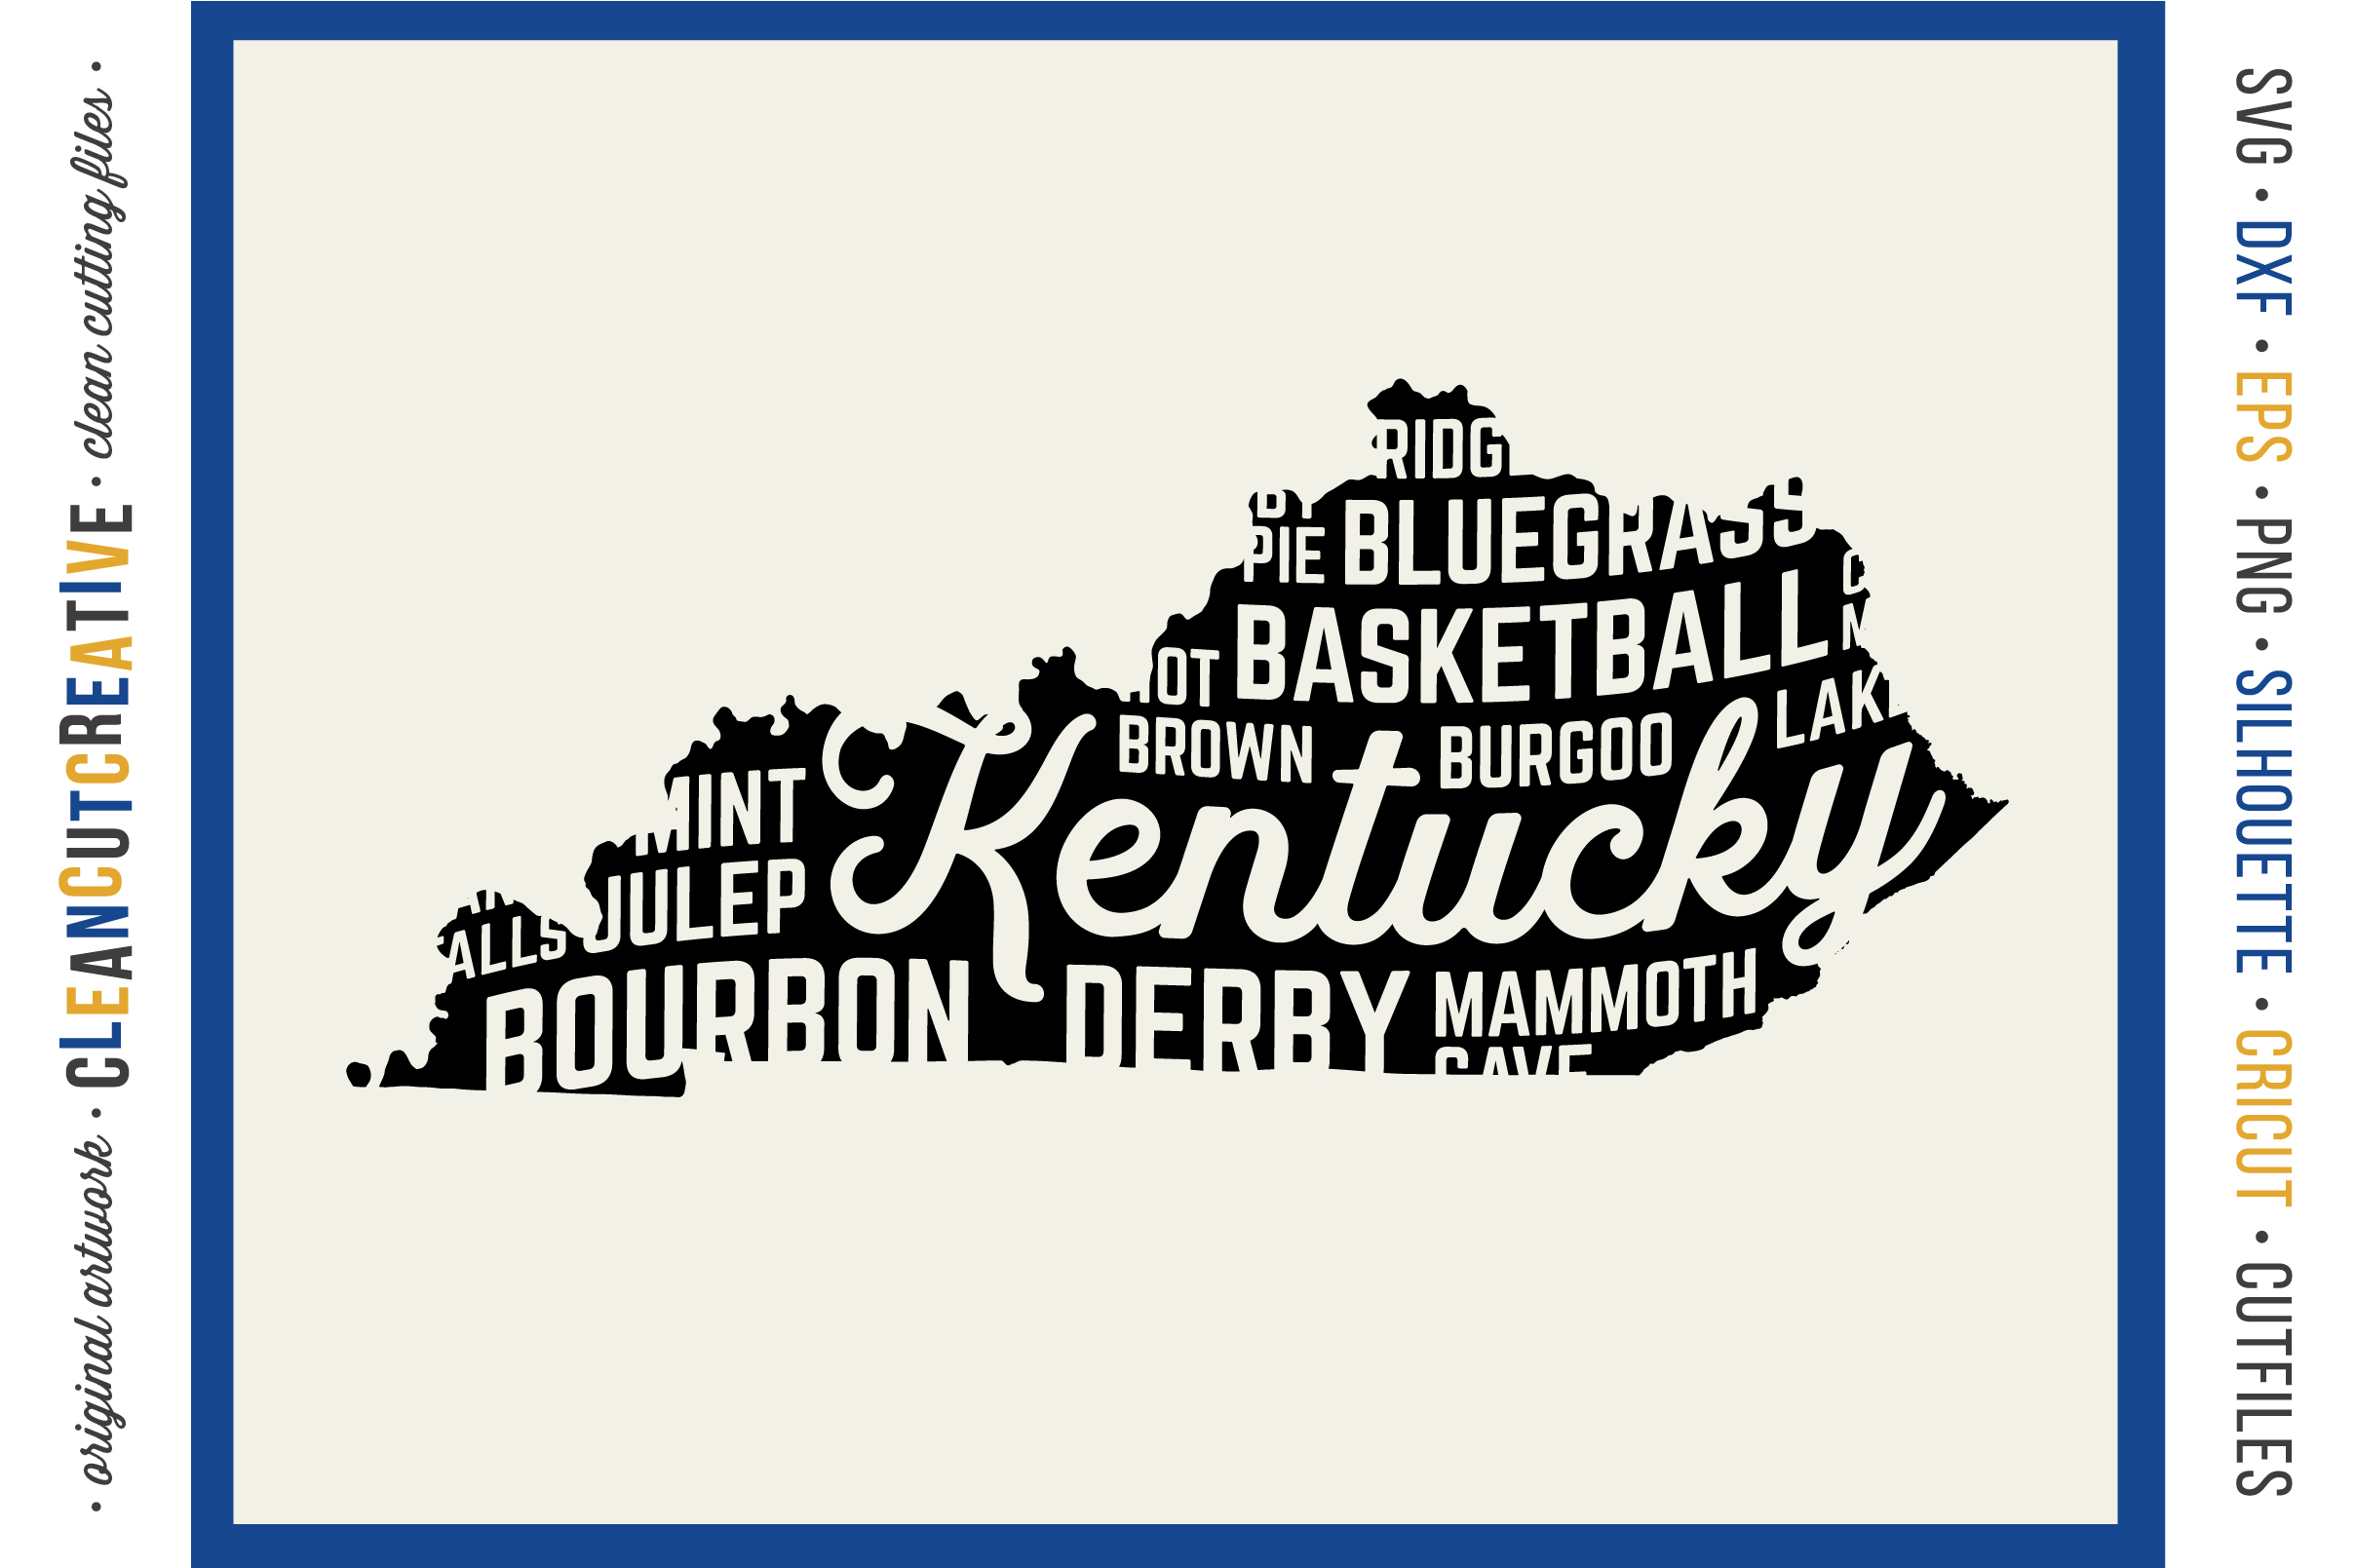 Free Free 331 Cricut Kentucky Home Svg SVG PNG EPS DXF File